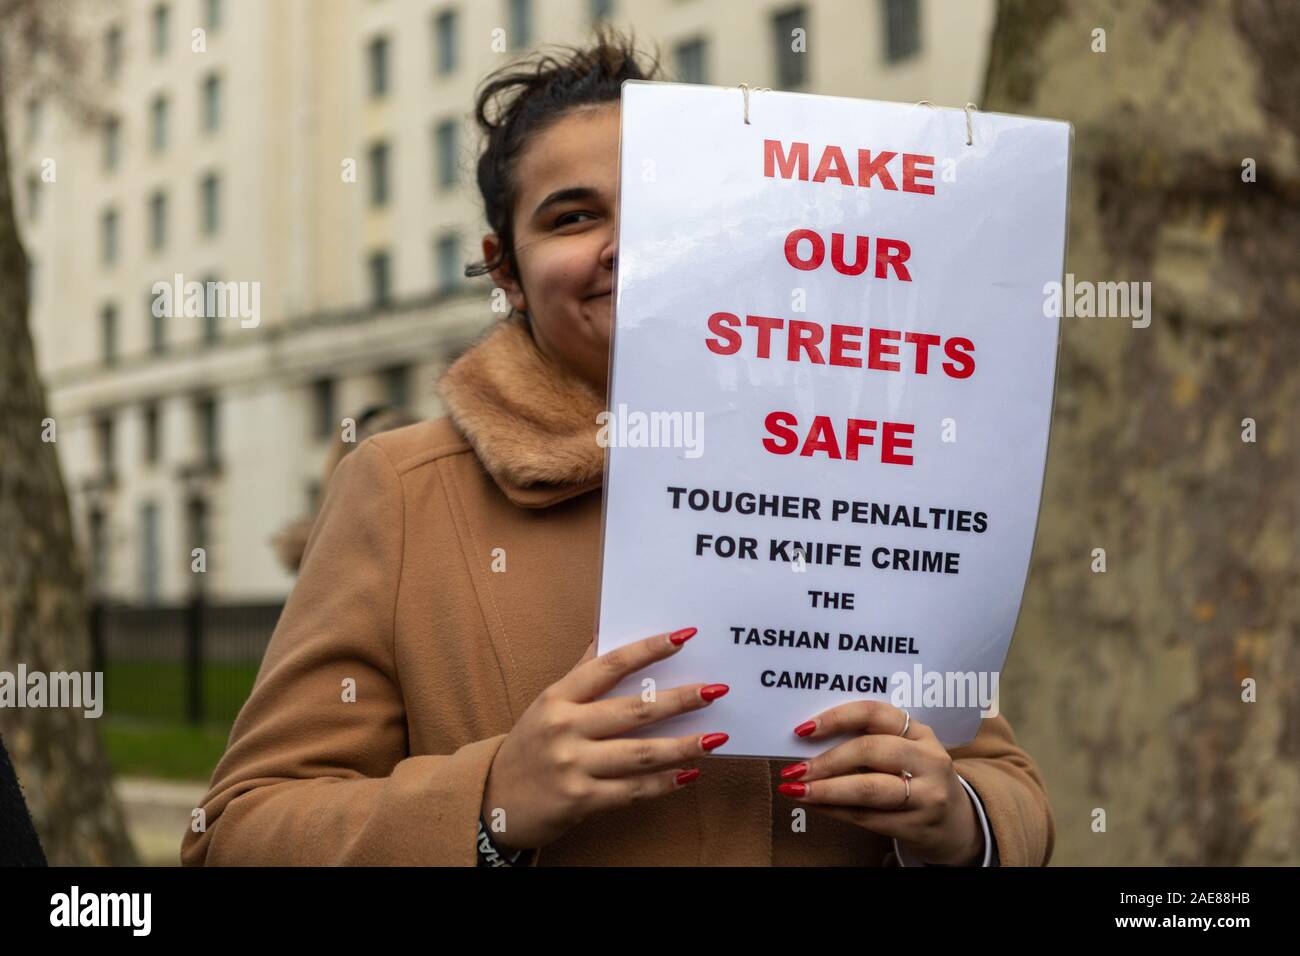 7th Dec 2019 Richmond Terrace London A Rally Following A March From Marble Arch For Tashan Daniel Who Was Murdered On His Way To An Arsenal Football Match With His Friends They